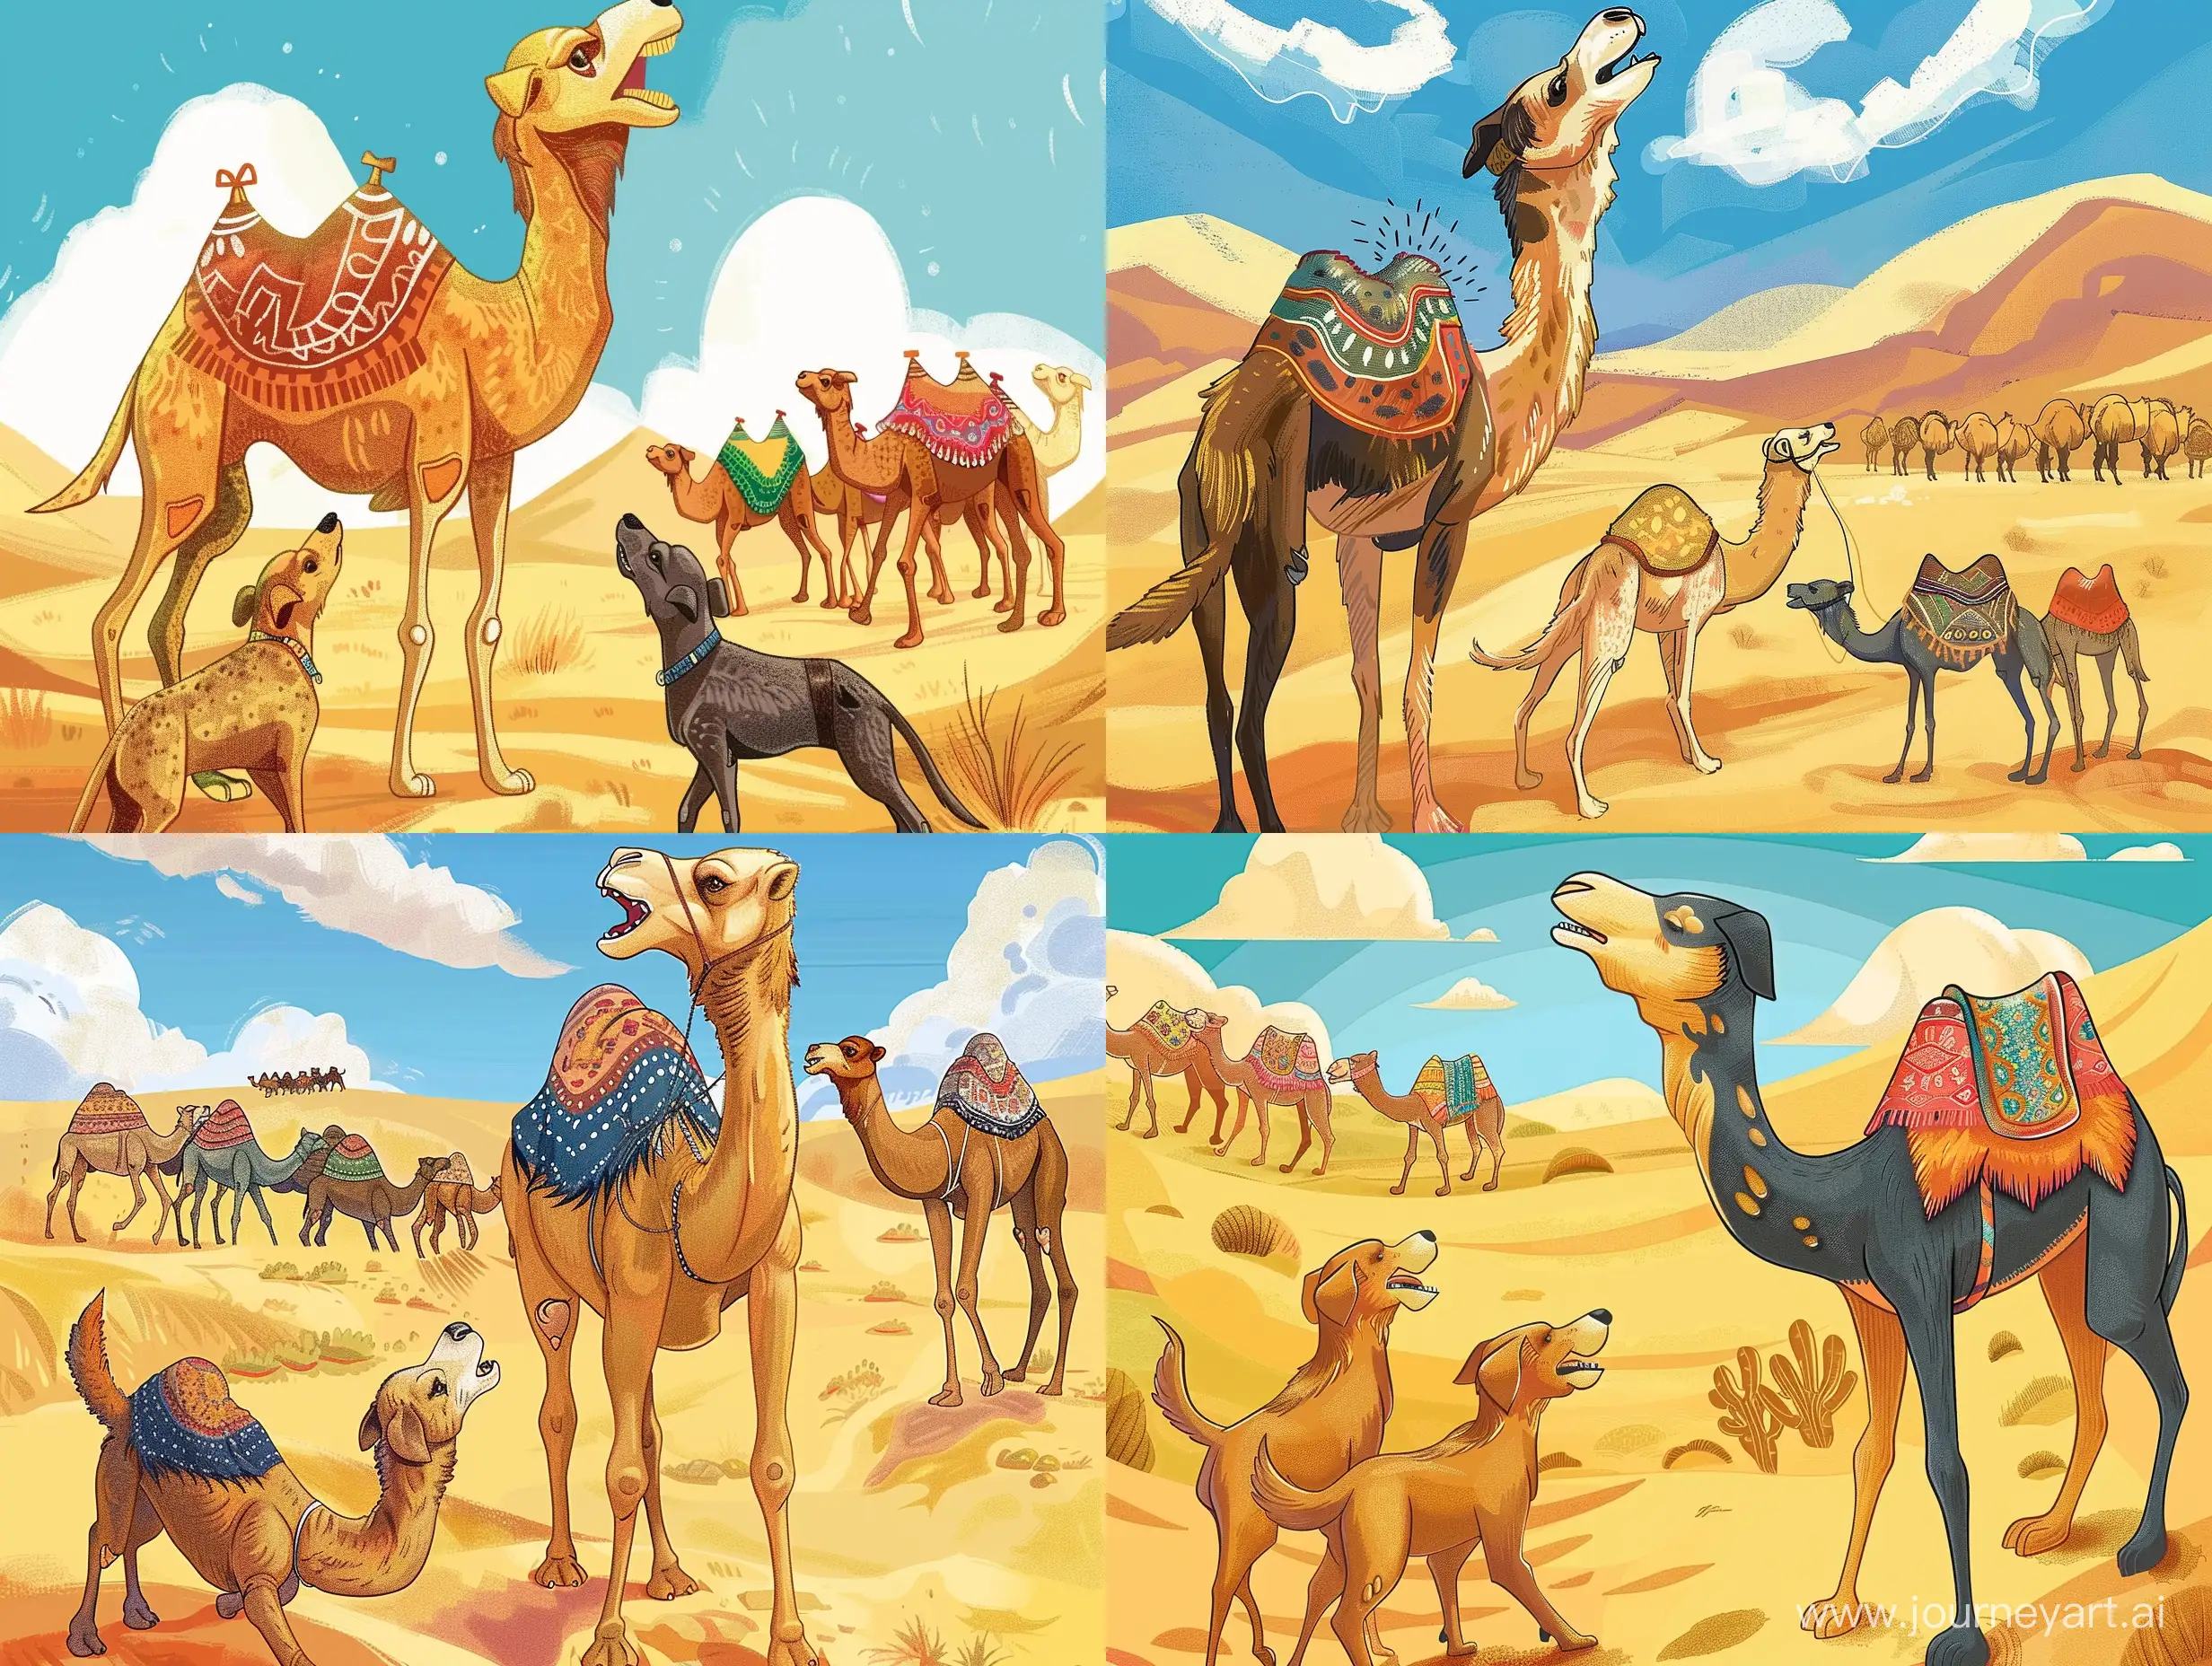 Three-Dogs-Barking-at-Calm-Caravan-of-Camels-in-the-Desert